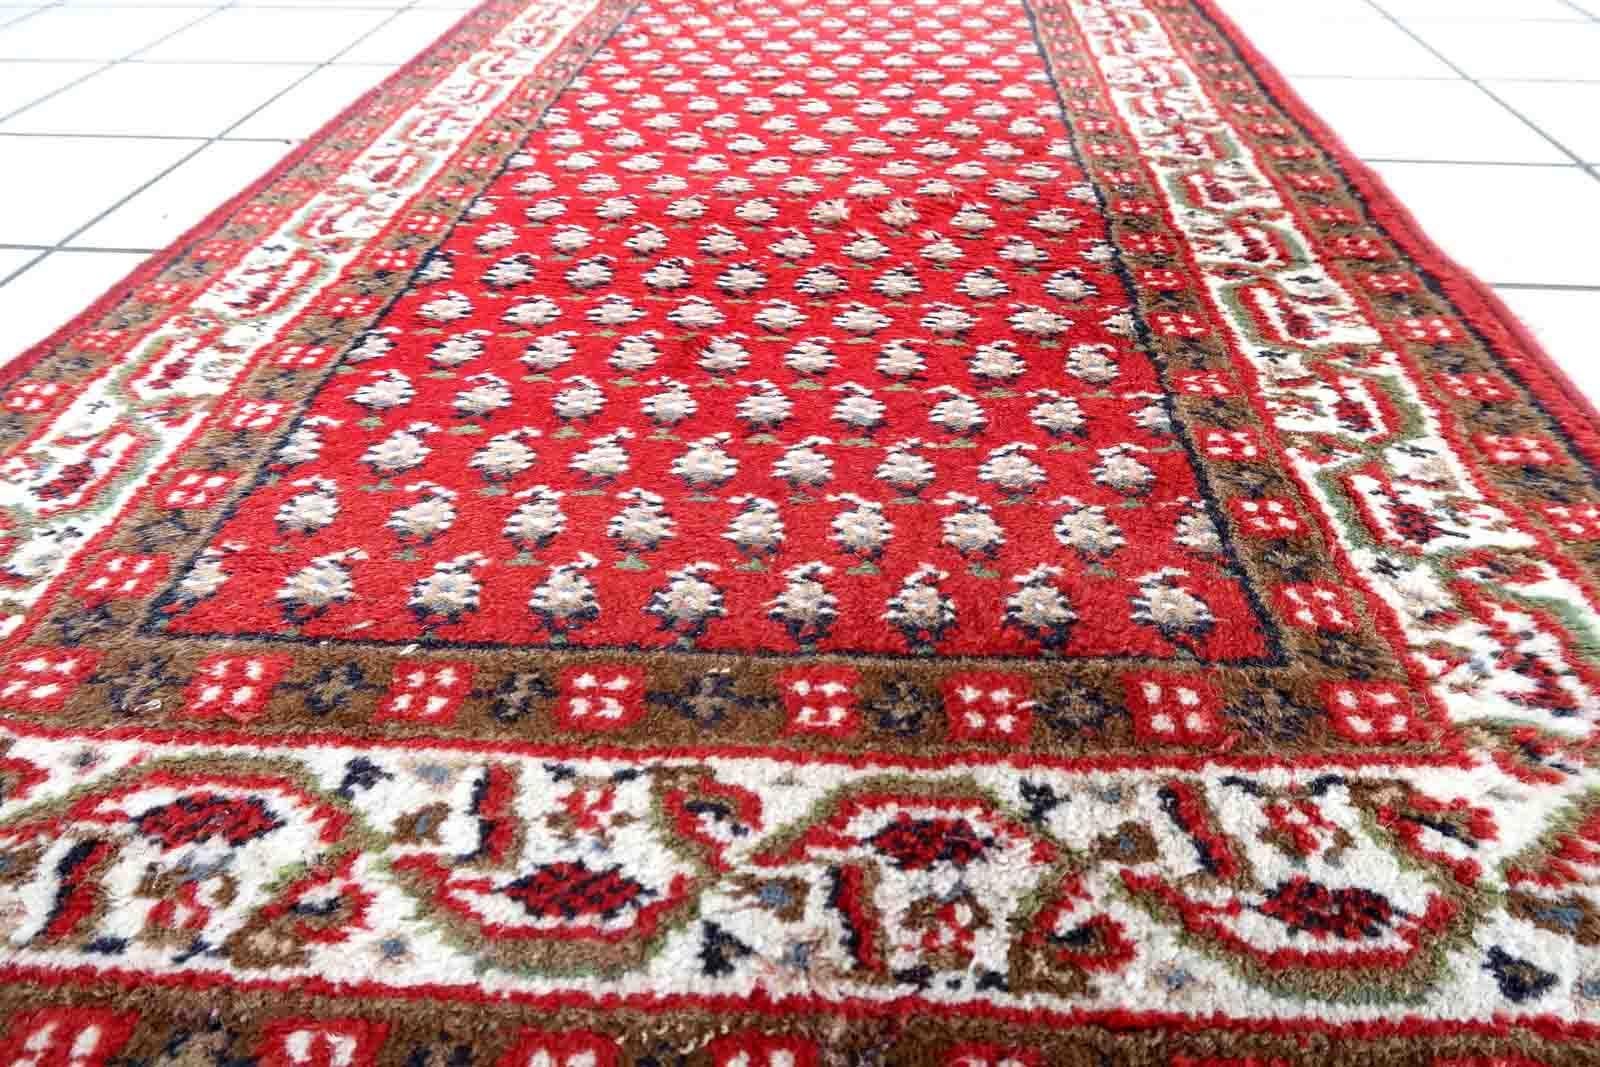 Handmade vintage Indian Seraband rug in red color and all-over design. The rug has been made in the end of 20th century. It is in good condition, has some signs of age.

-condition: good,

-circa: 1970s,

-size: 2.4' x 4.5' (74cm x